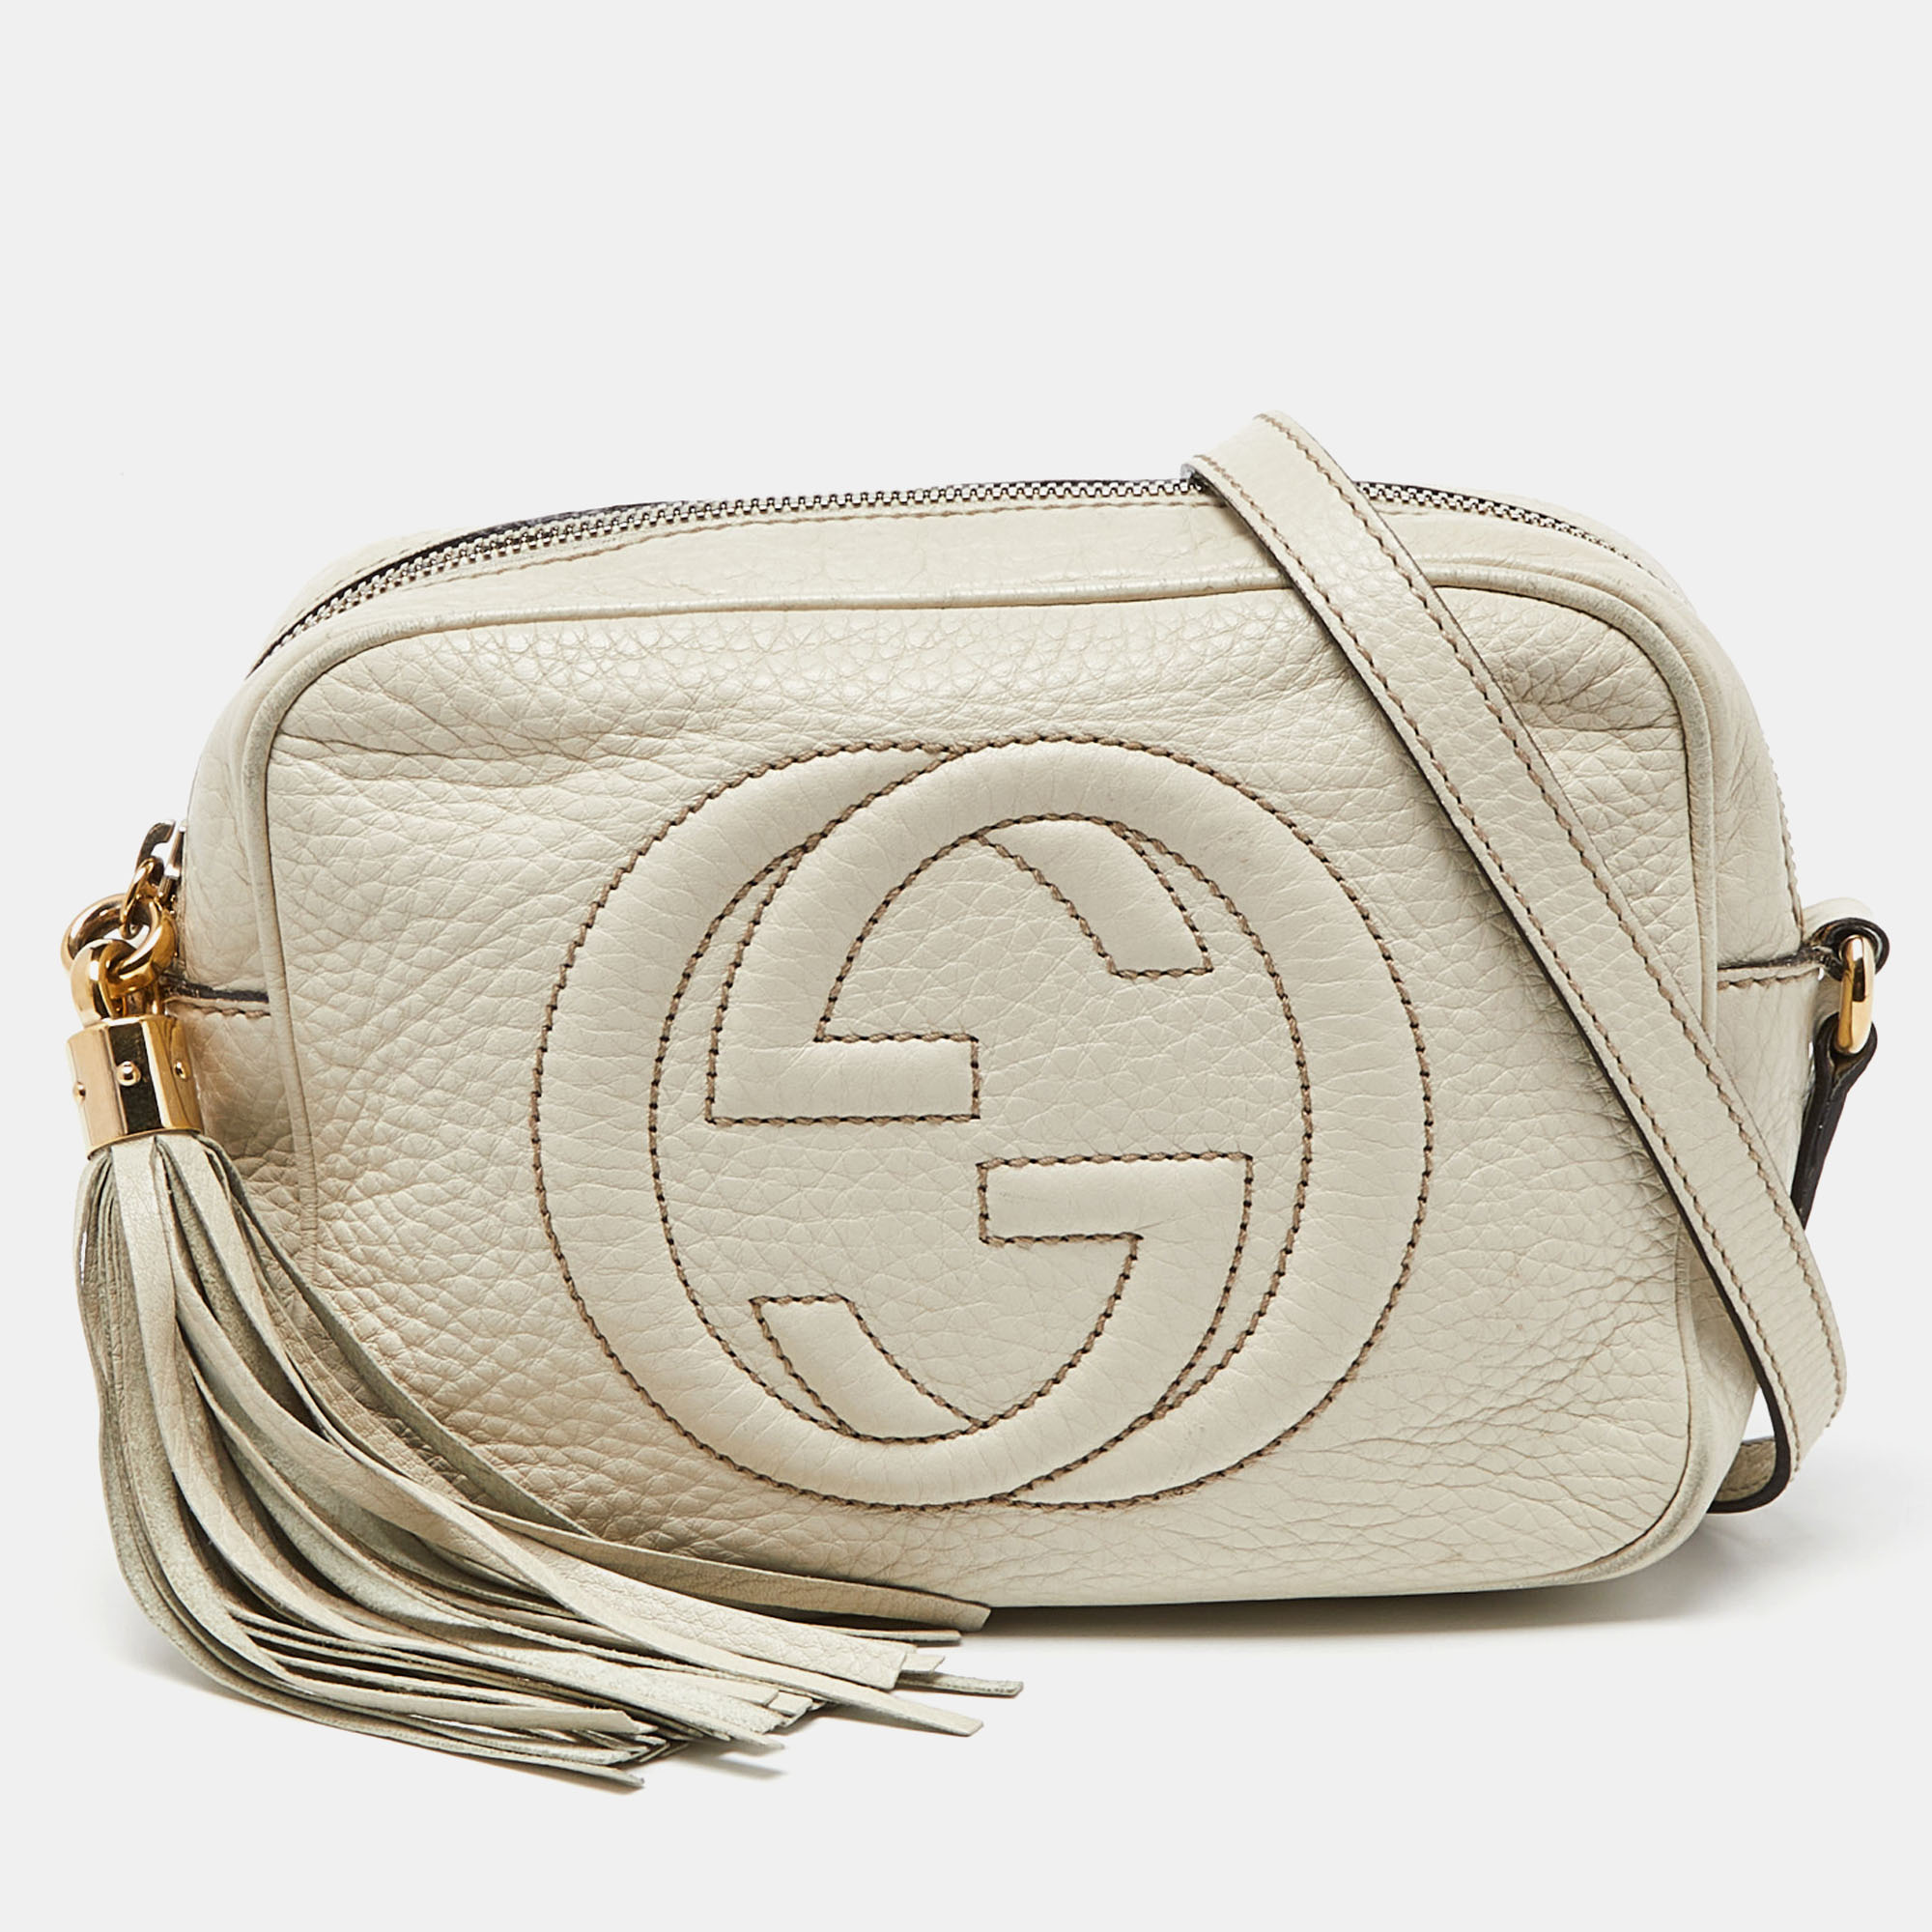 Ideal for both evening and daytime outings this Soho Disco bag by Gucci deserves to be in your closet. Made from leather the exterior features brand logo on the front and the interior is secured by a zip closure. The bag features a tassel detailing and suspends from a slender shoulder strap.